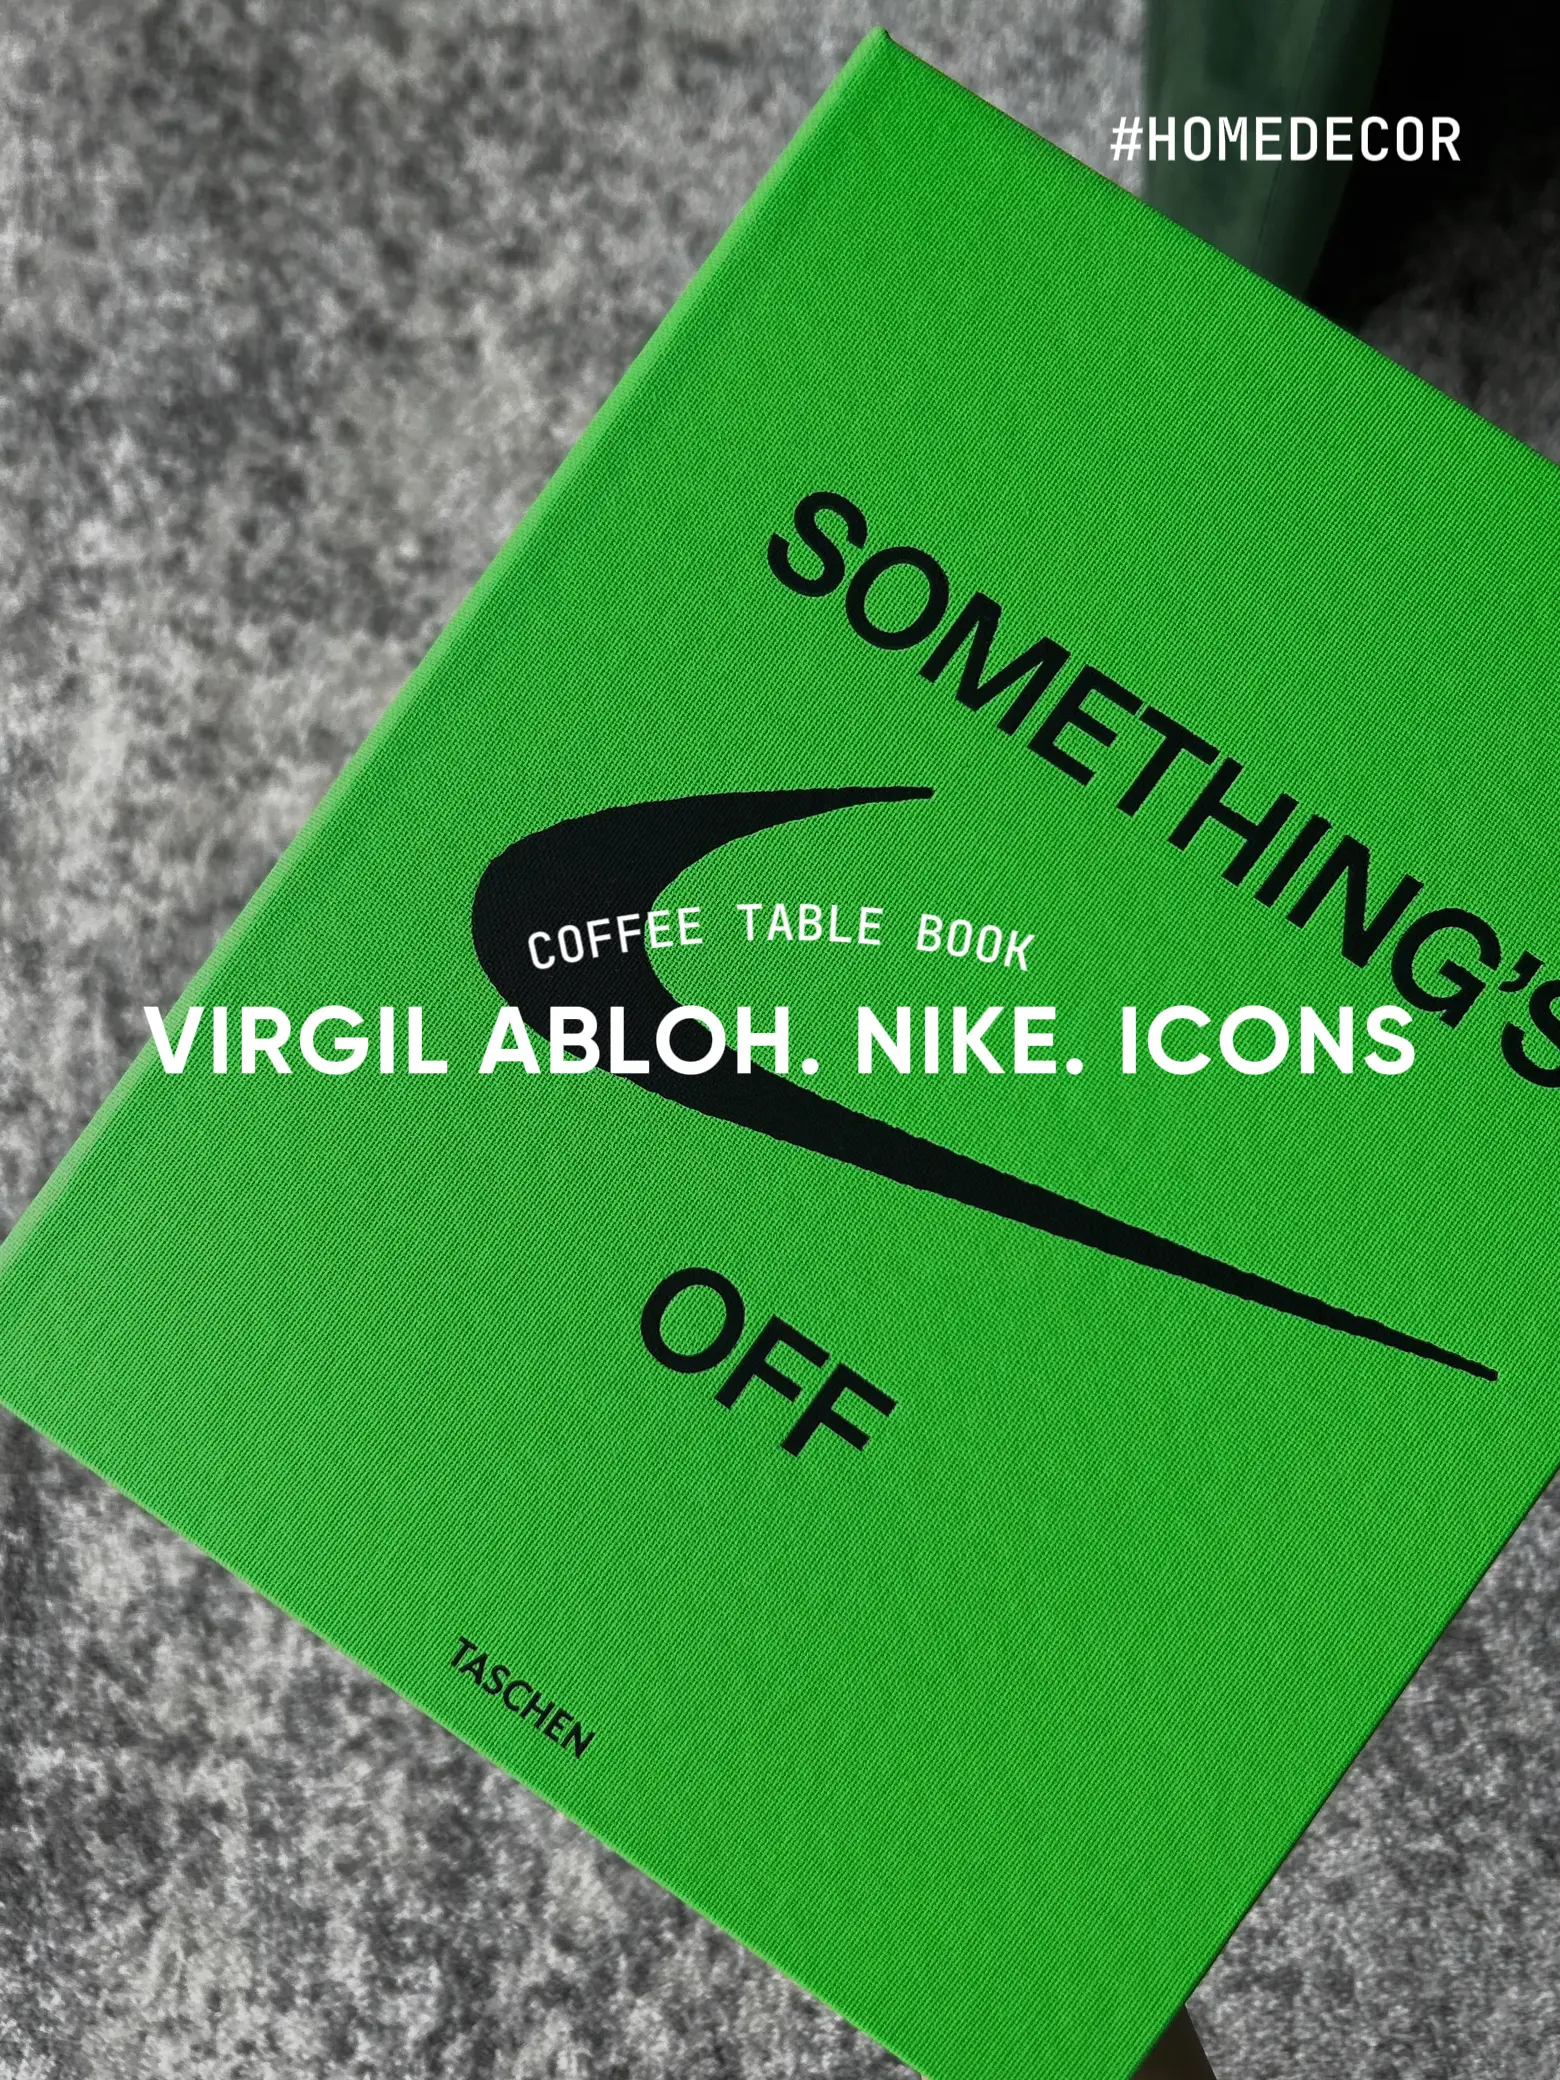 Coffee table book: Virgil Abloh Nike. Icons, Gallery posted by Natalia